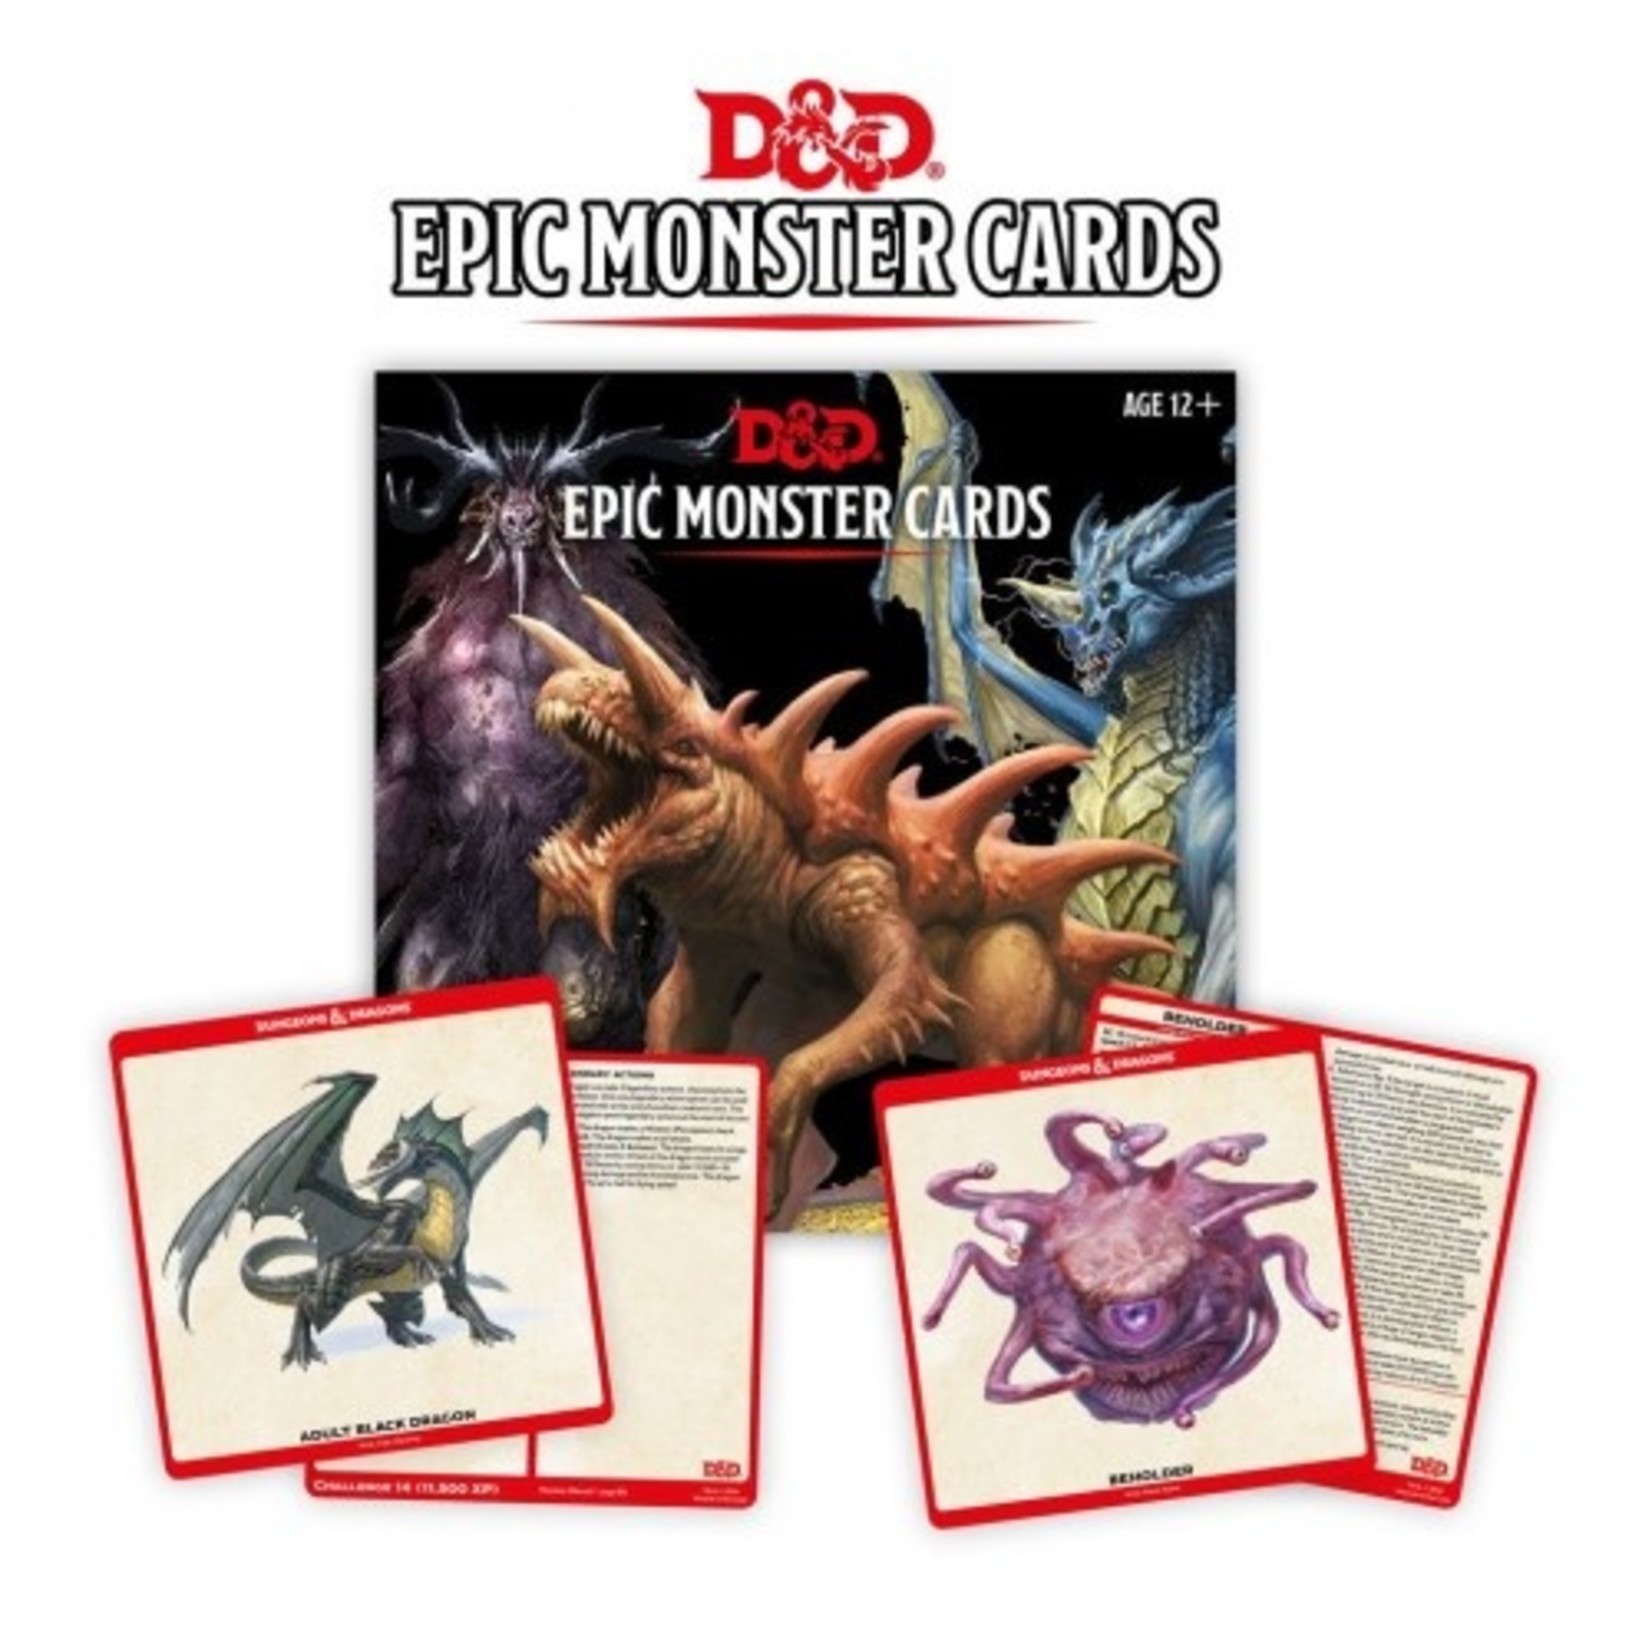 Gale Force 9 Dungeons and Dragons Epic Monsters Dungeons and Dragons Monster Cards